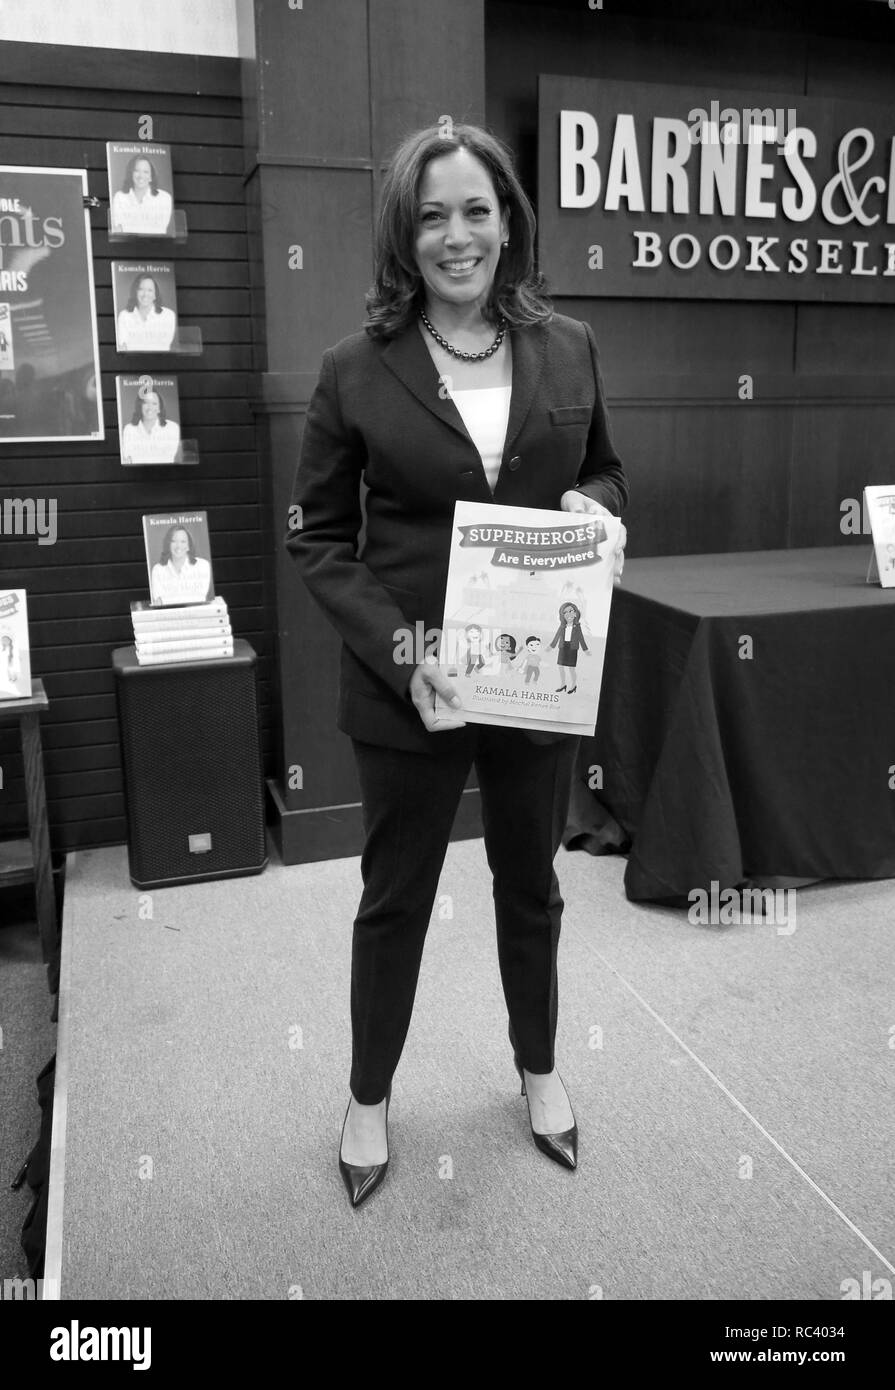 Los Angeles, Ca, USA. 13th Jan, 2019. U.S. Senator Kamala Harris reads and signs copies of her book, Superheroes Are Everywhere at Barnes & Noble at The Grove in Los Angeles, California on January 13, 2019. Credit: Faye Sadou/Media Punch/Alamy Live News Stock Photo